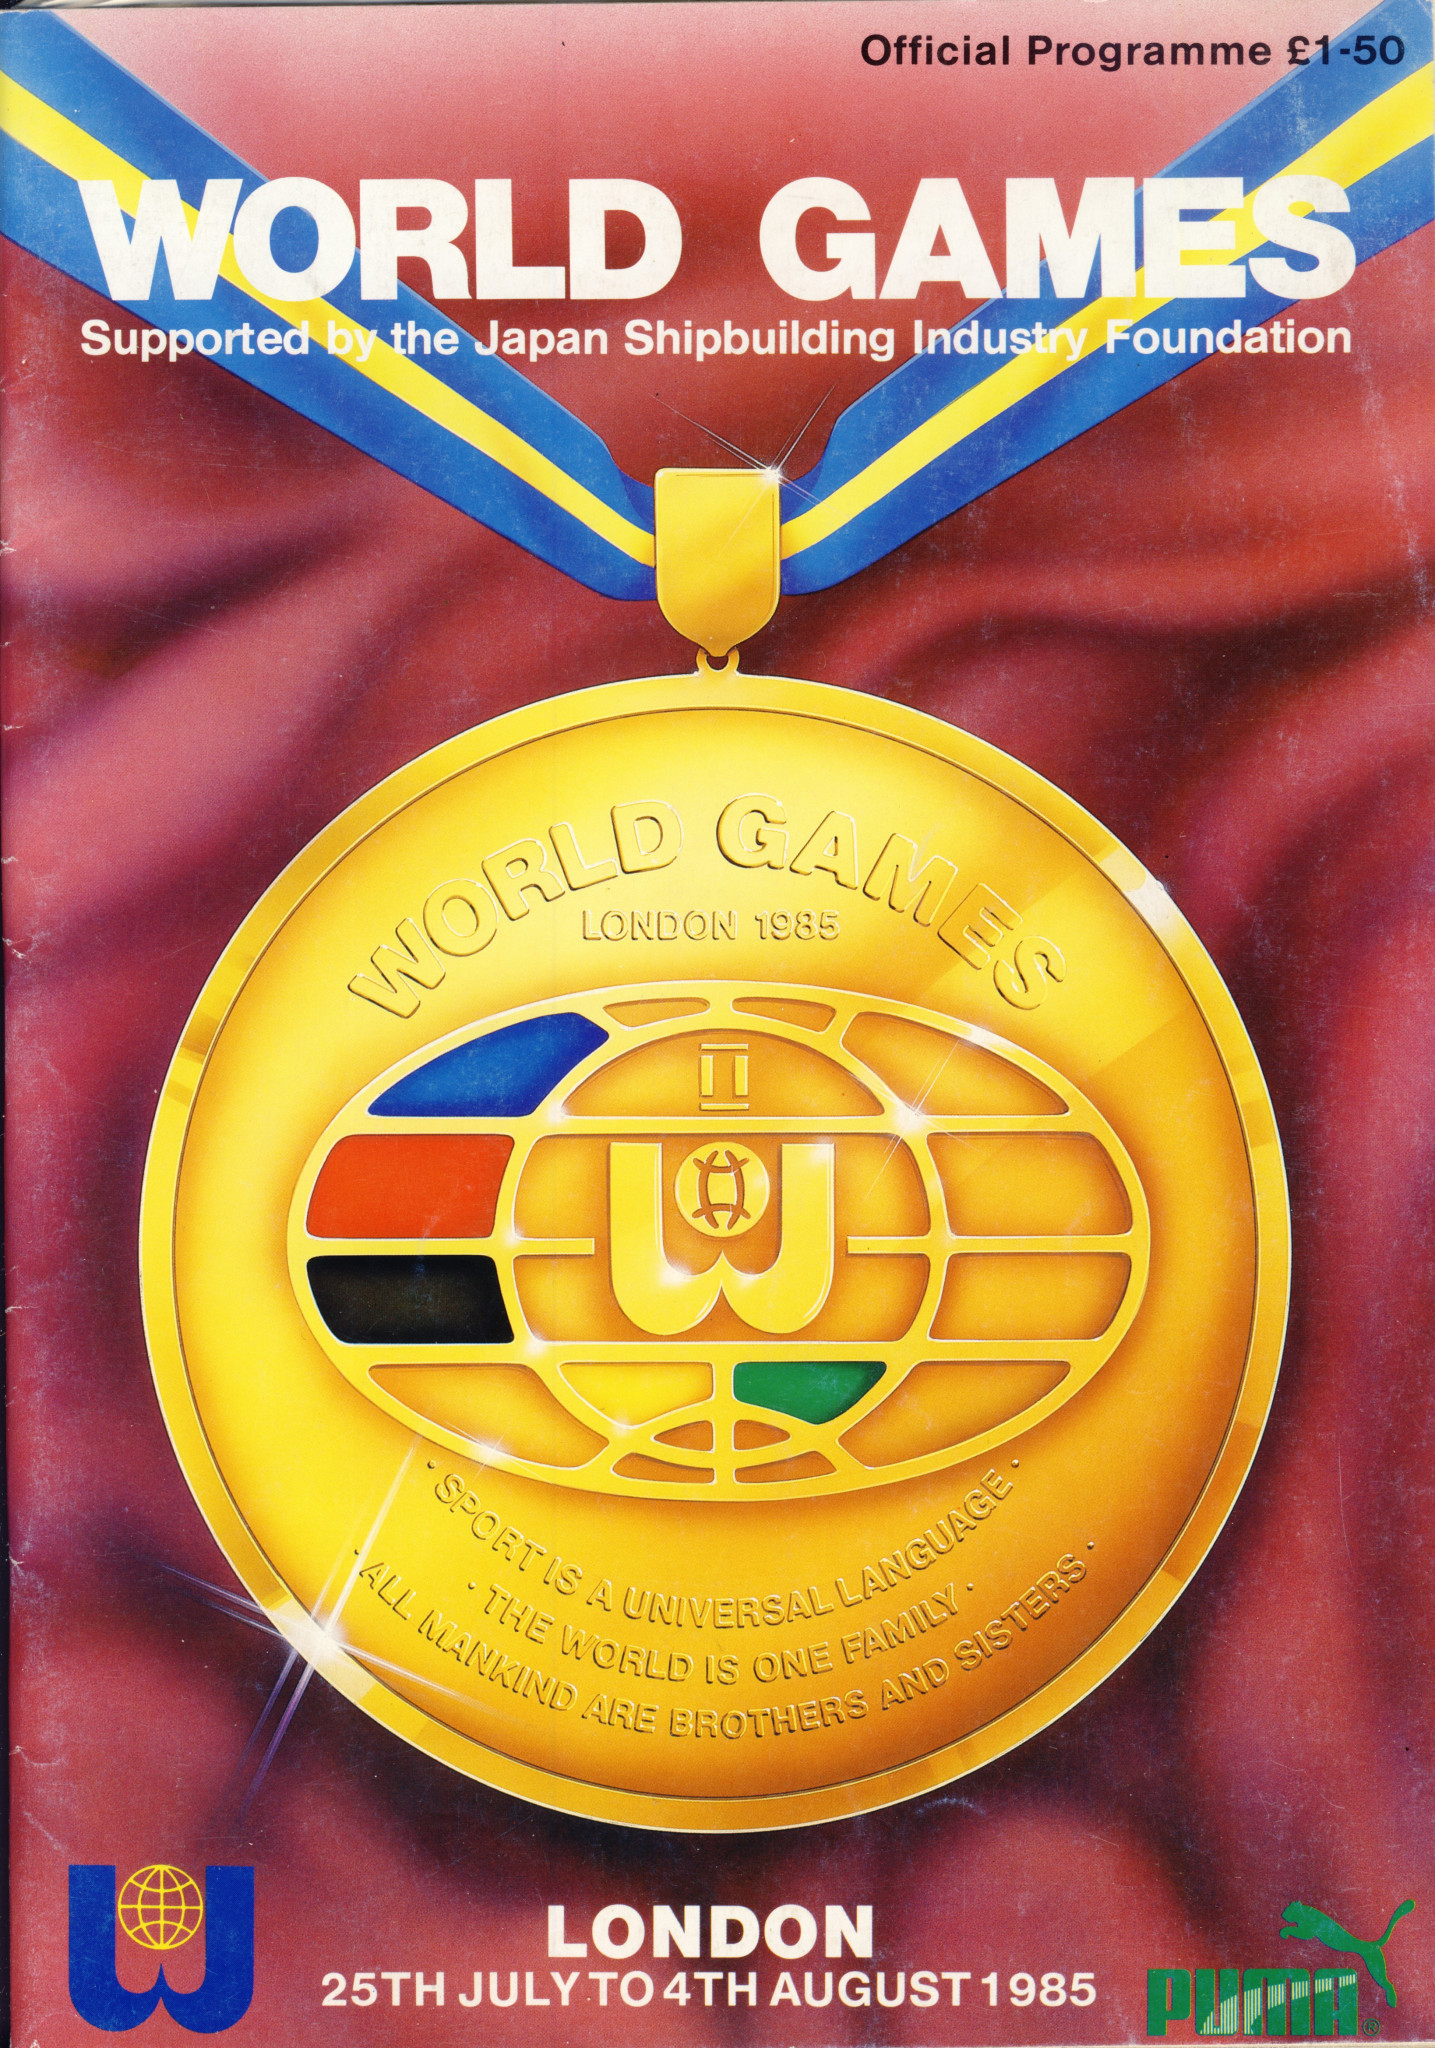 The programme for the 1985 World Games in London is now a collectors item  ©World Games 1985